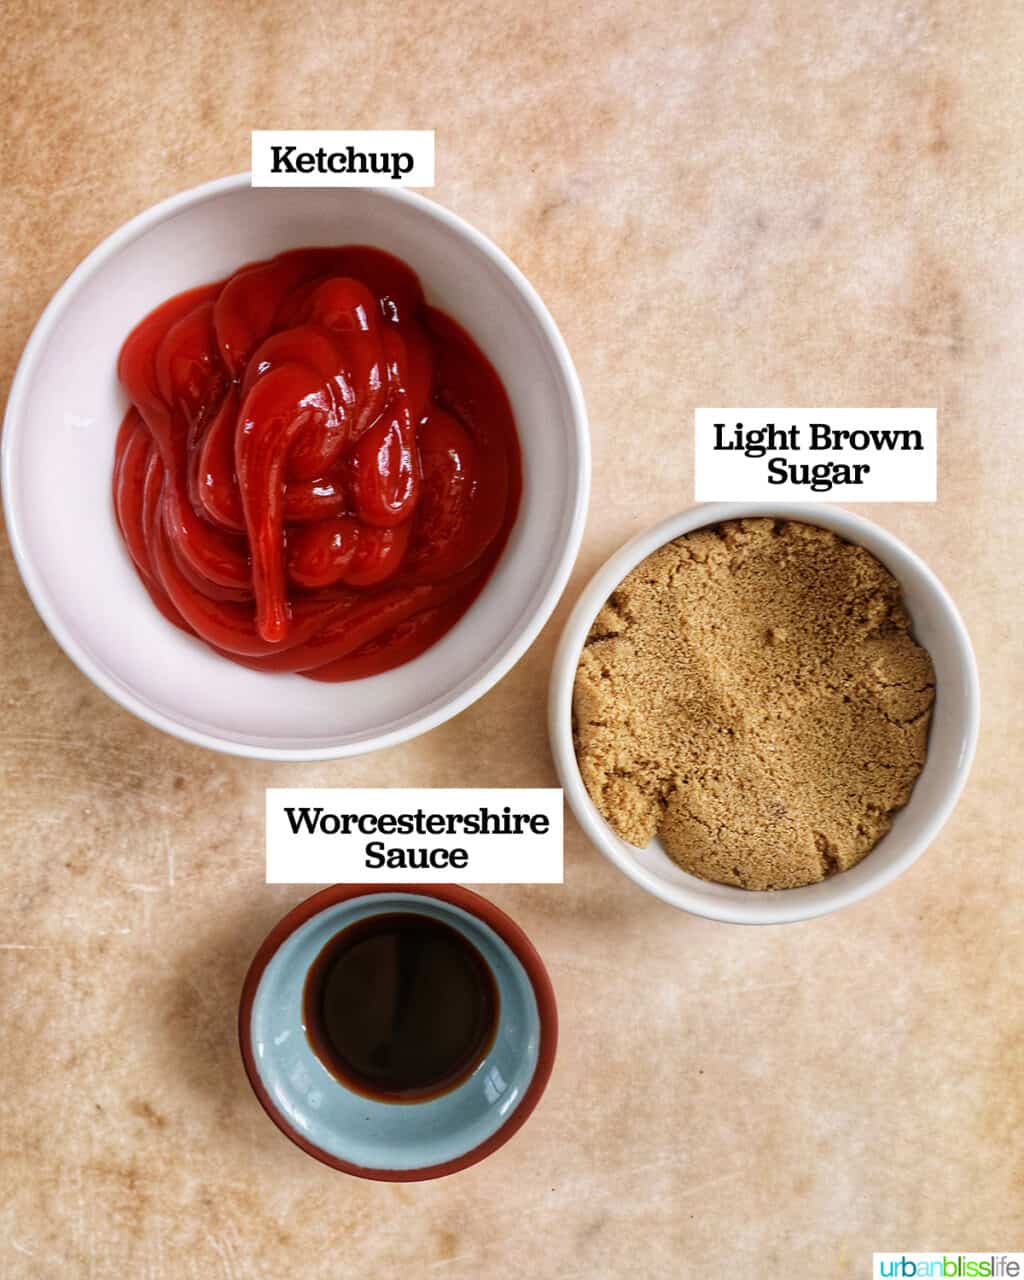 bowls with ketchup, brown sugar, and worcestershire sauce on a yellow table.